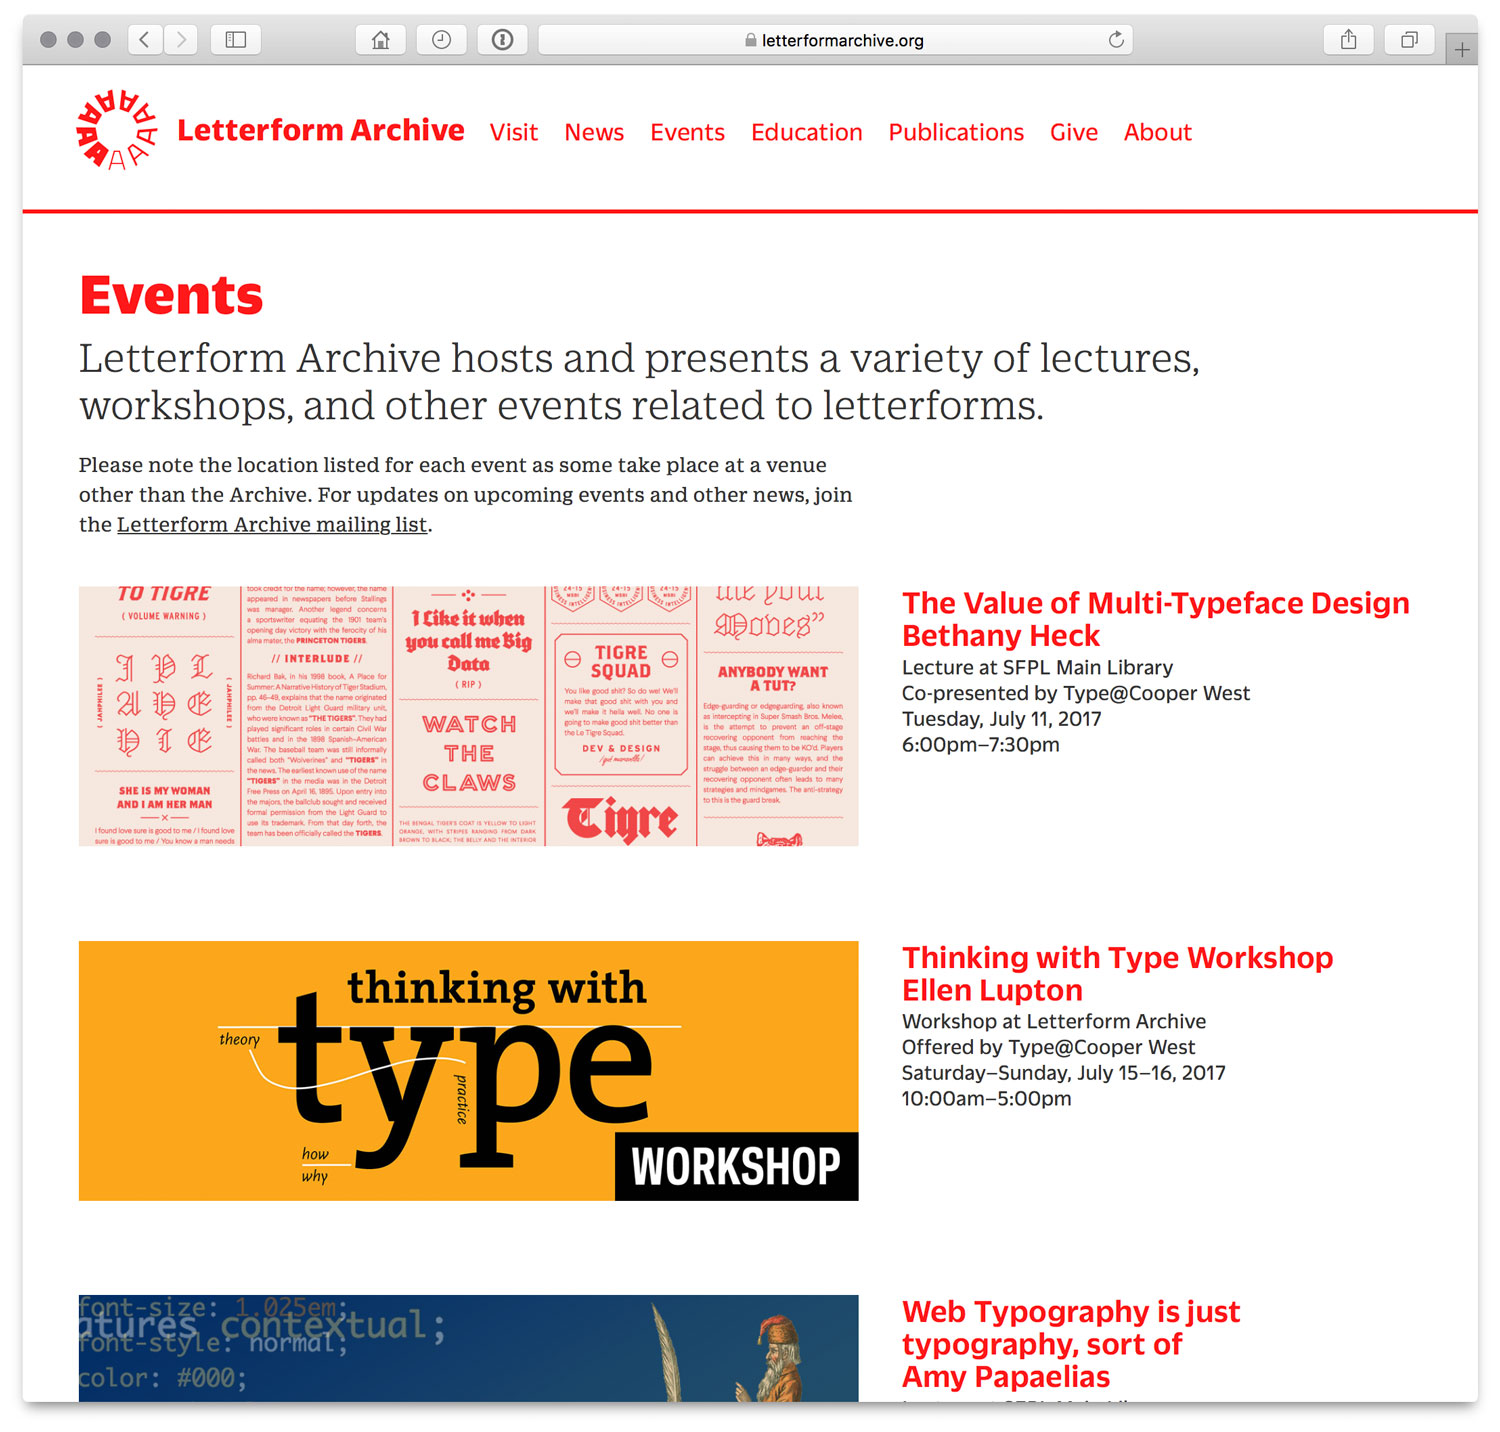 A screenshot of the Events page of Letterform Archive’s website in July 2017